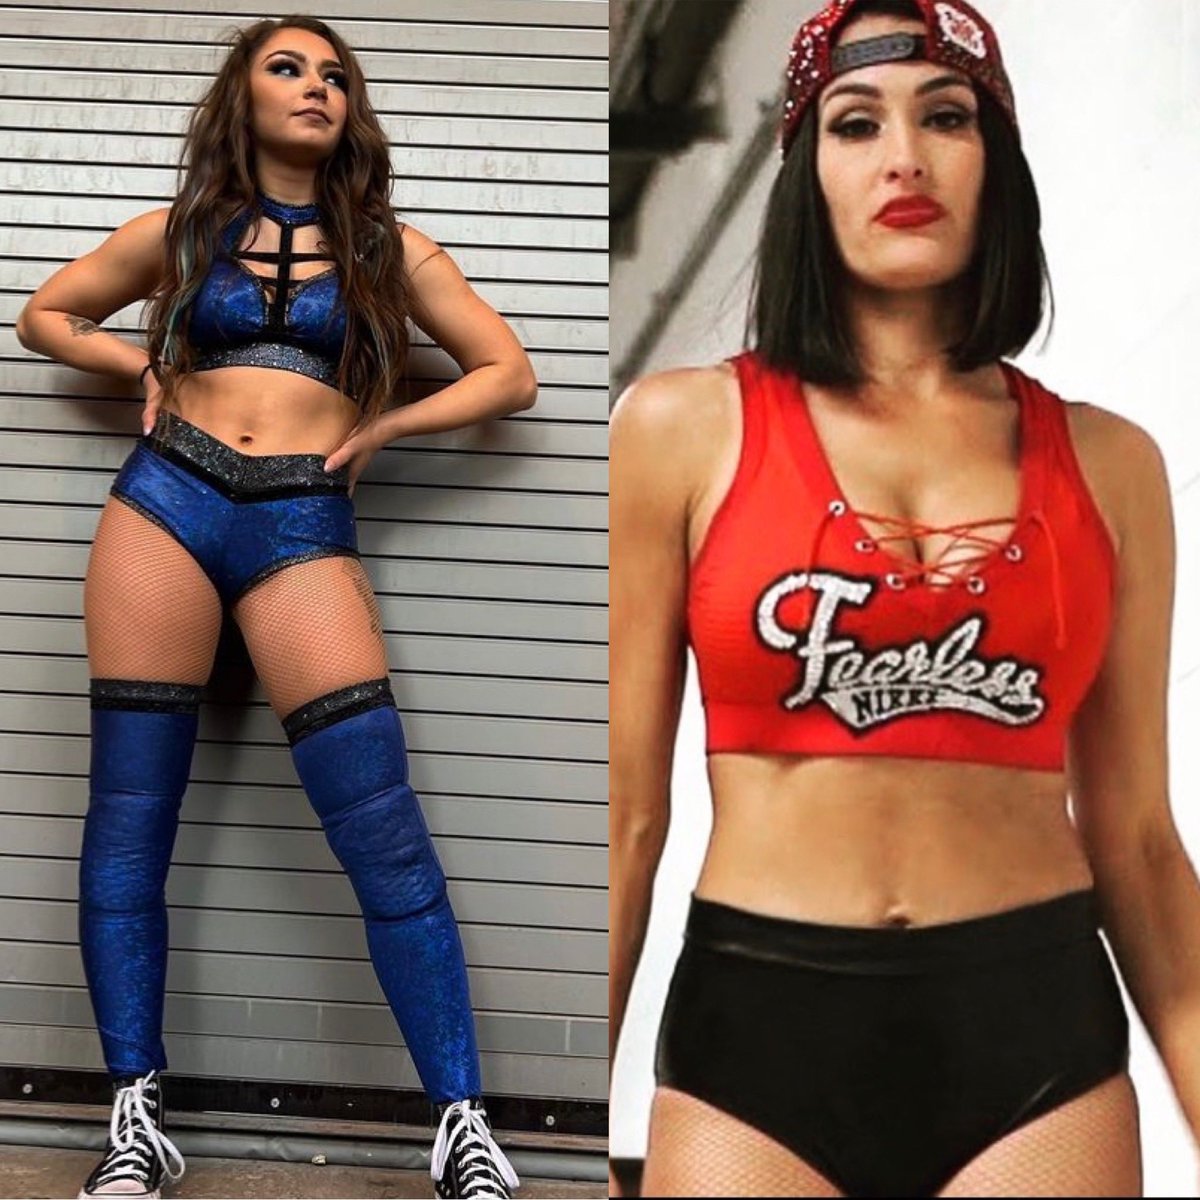 Love both of these women and their beautiful wrestling outfits. Wish Skye Blue would wrestle Nikki Bella and both wear these wrestling outfits for a one on one match. Who would win and how by a three count pin or a tap out? https://t.co/Usa95VyKZ8